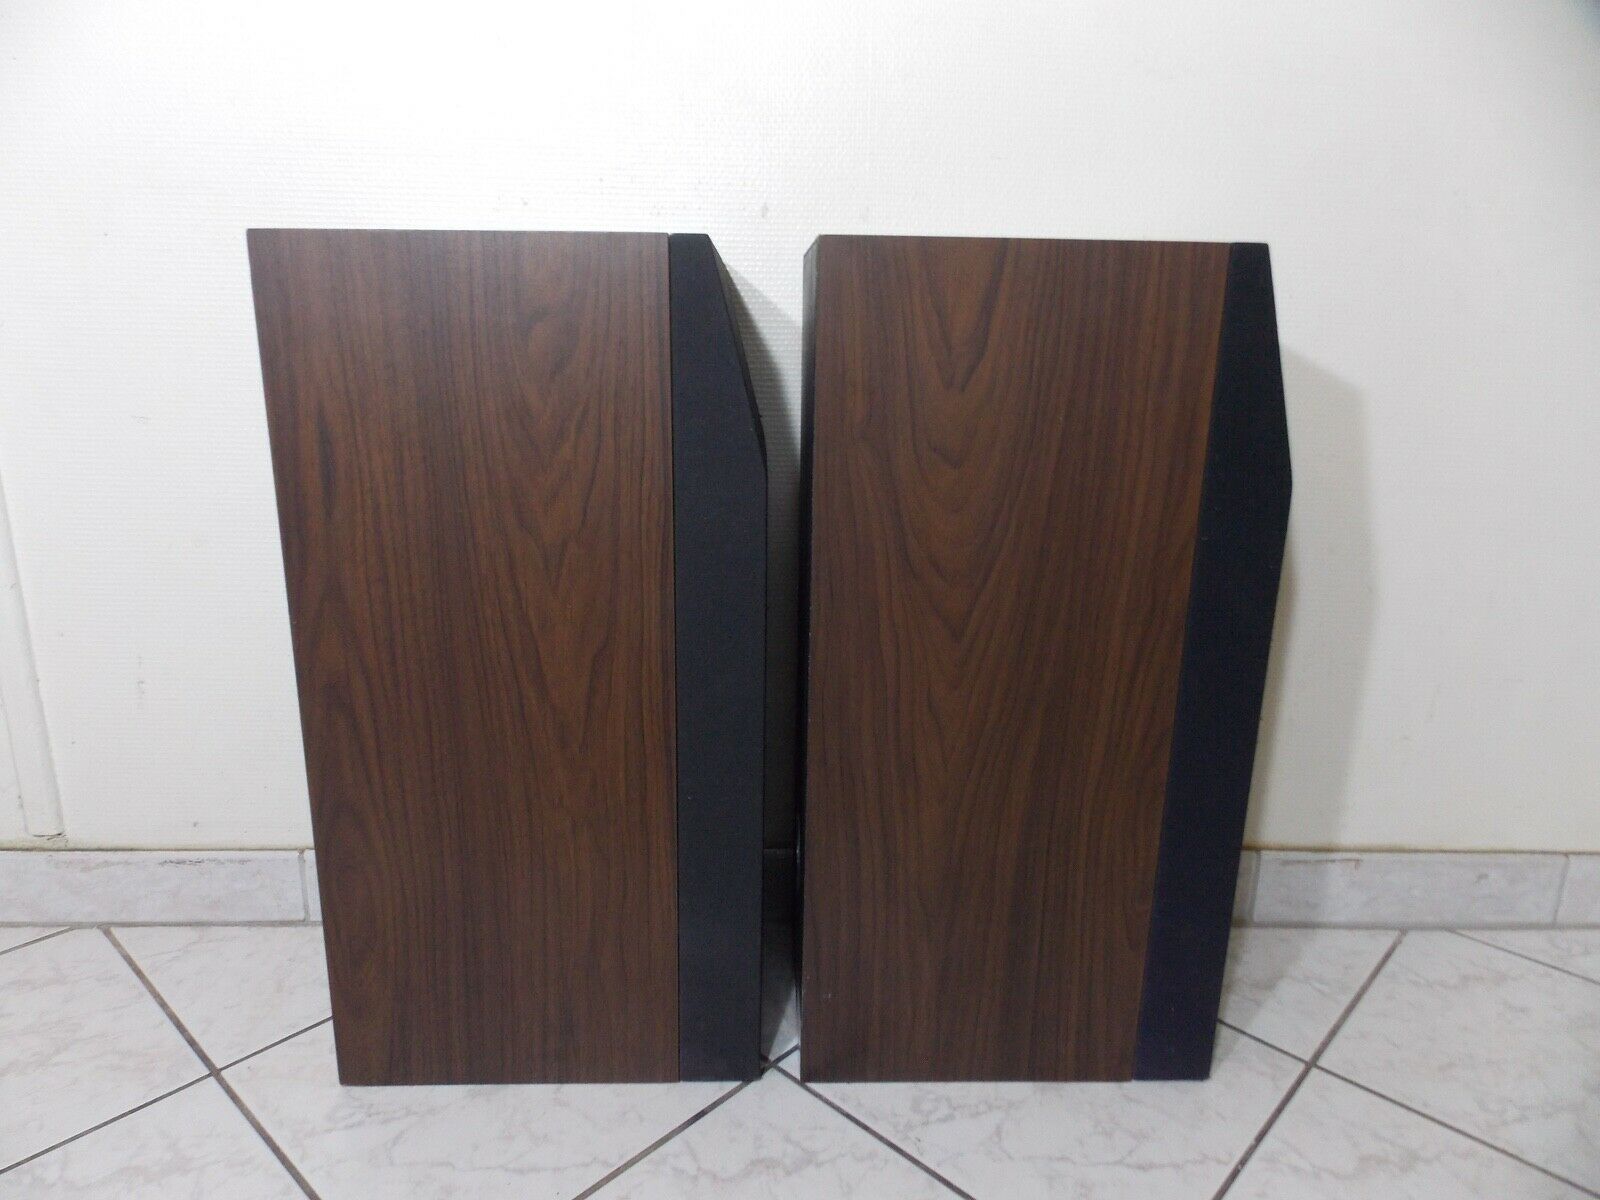 enceintes speakers monitors 3A TYPE 360 vintage occasion